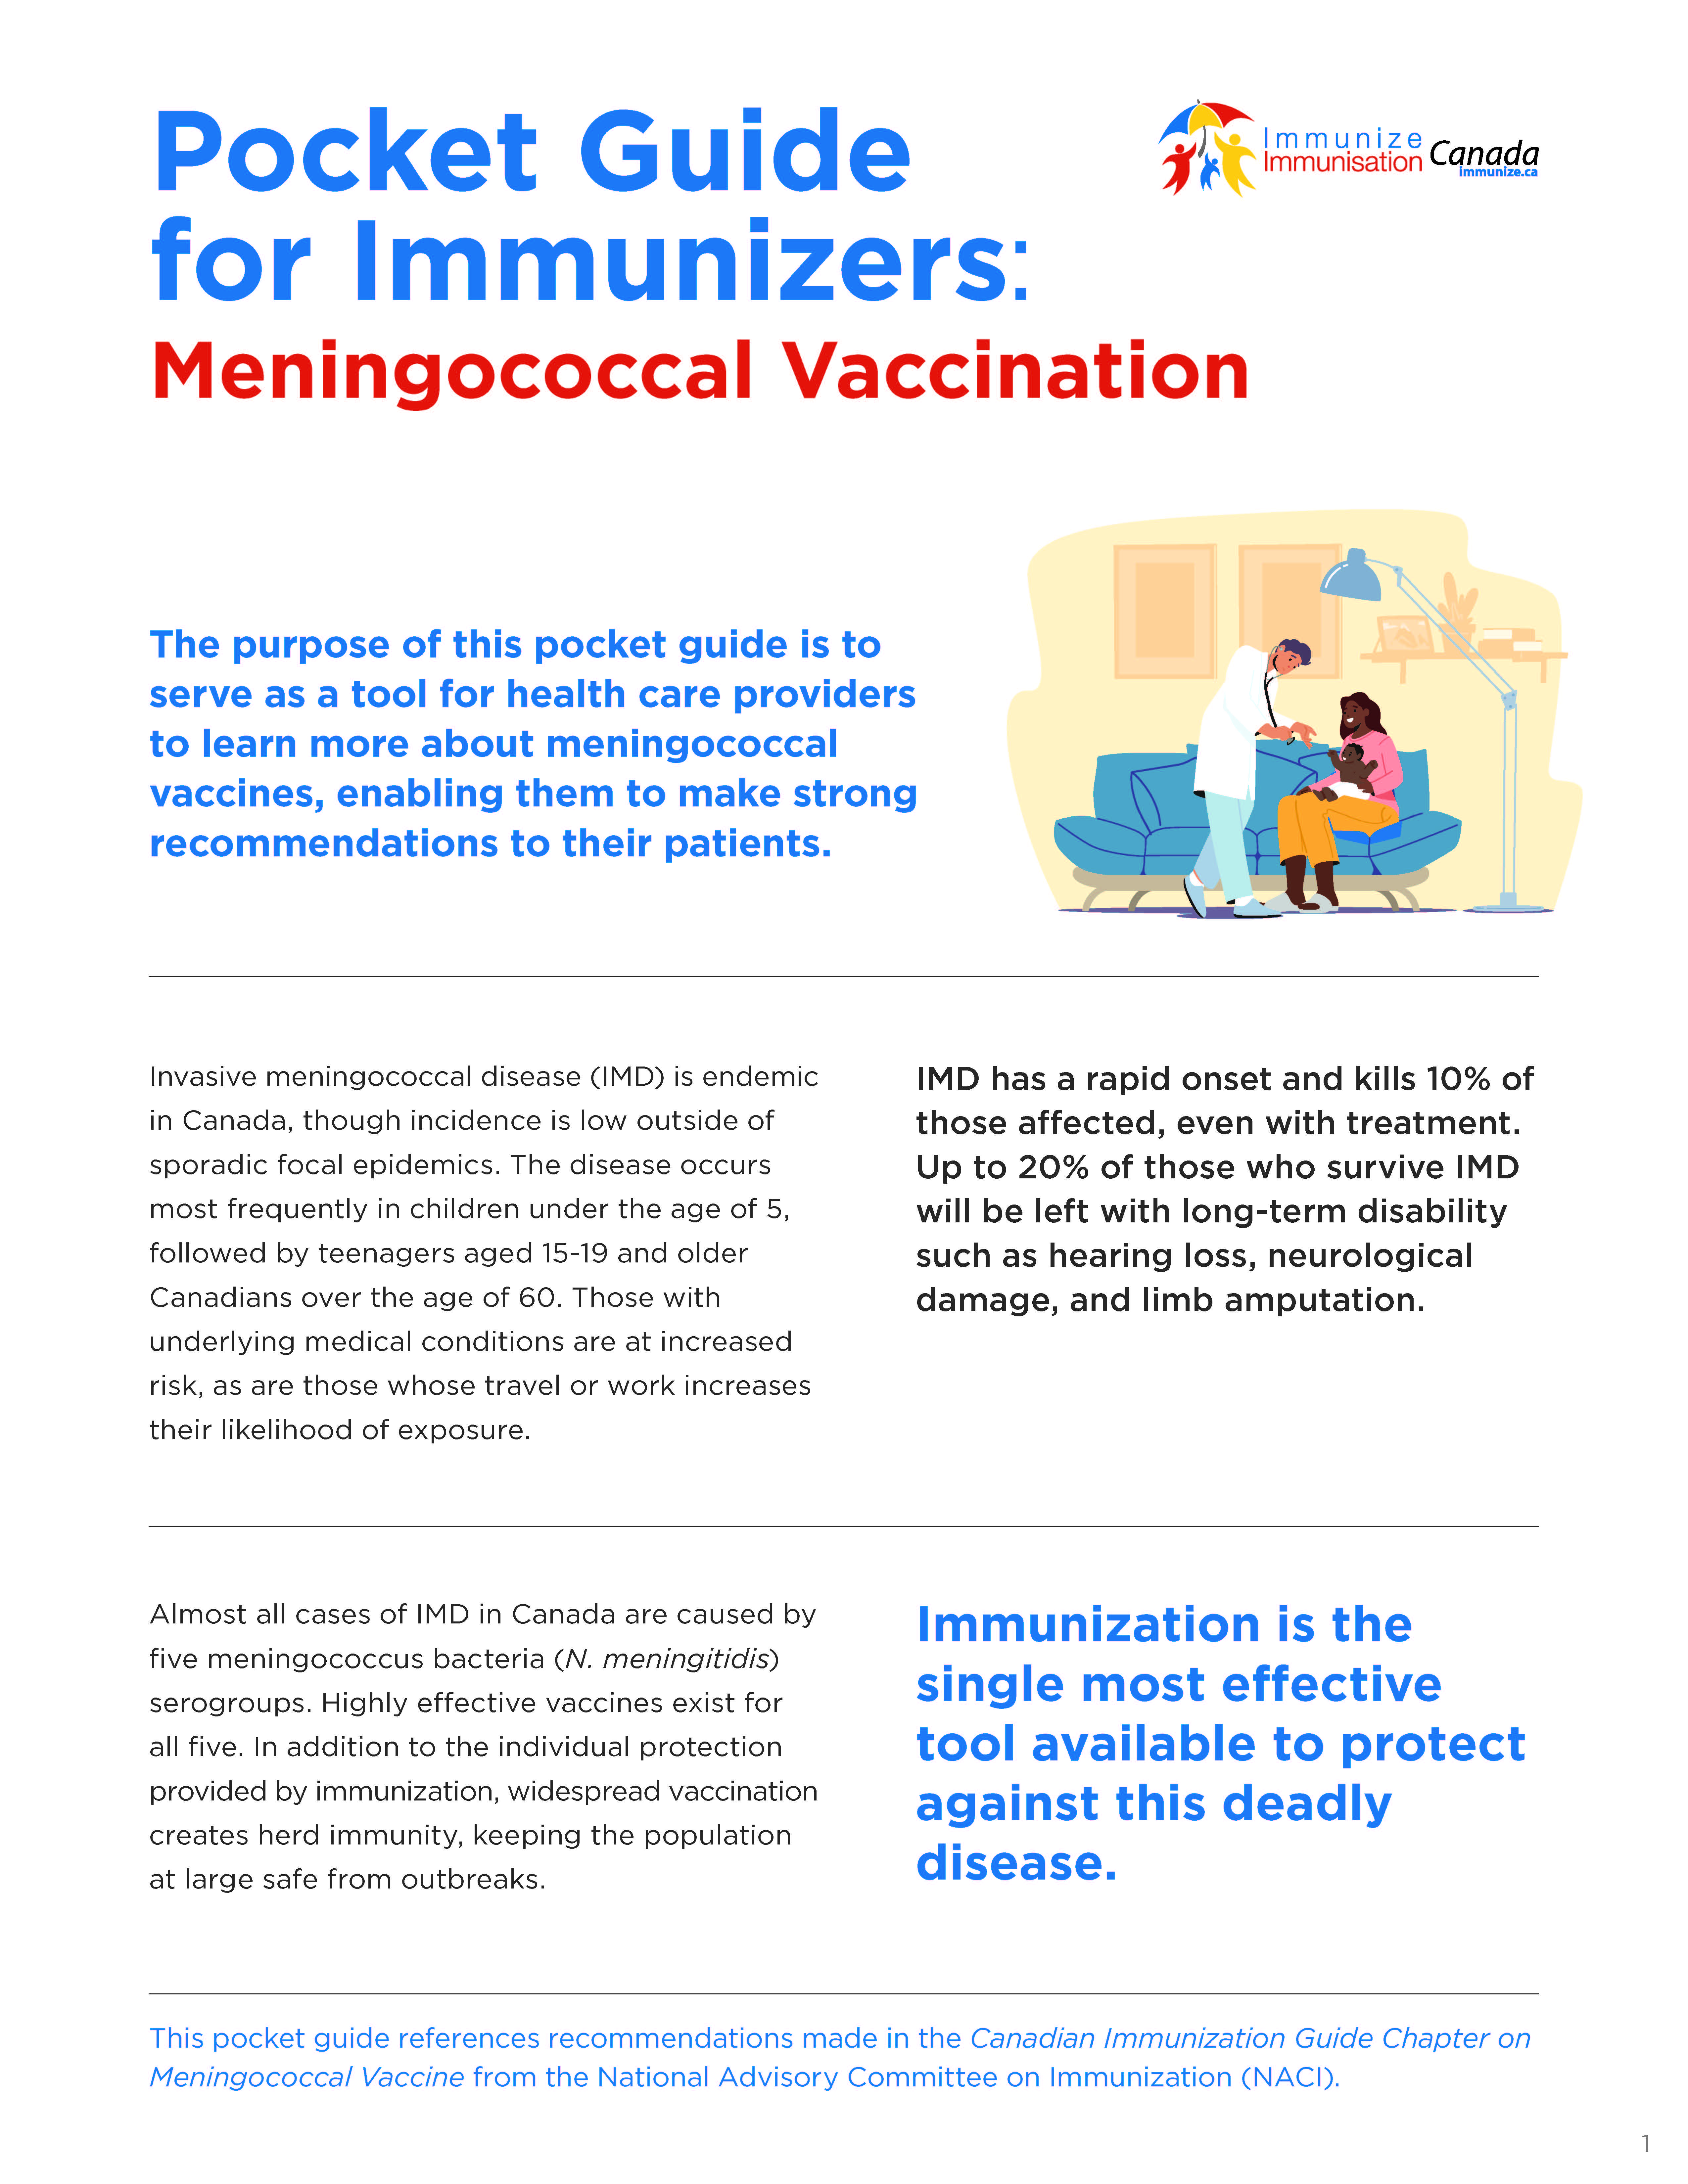 Pocket Guide for Immunizers: Meningococcal Vaccination